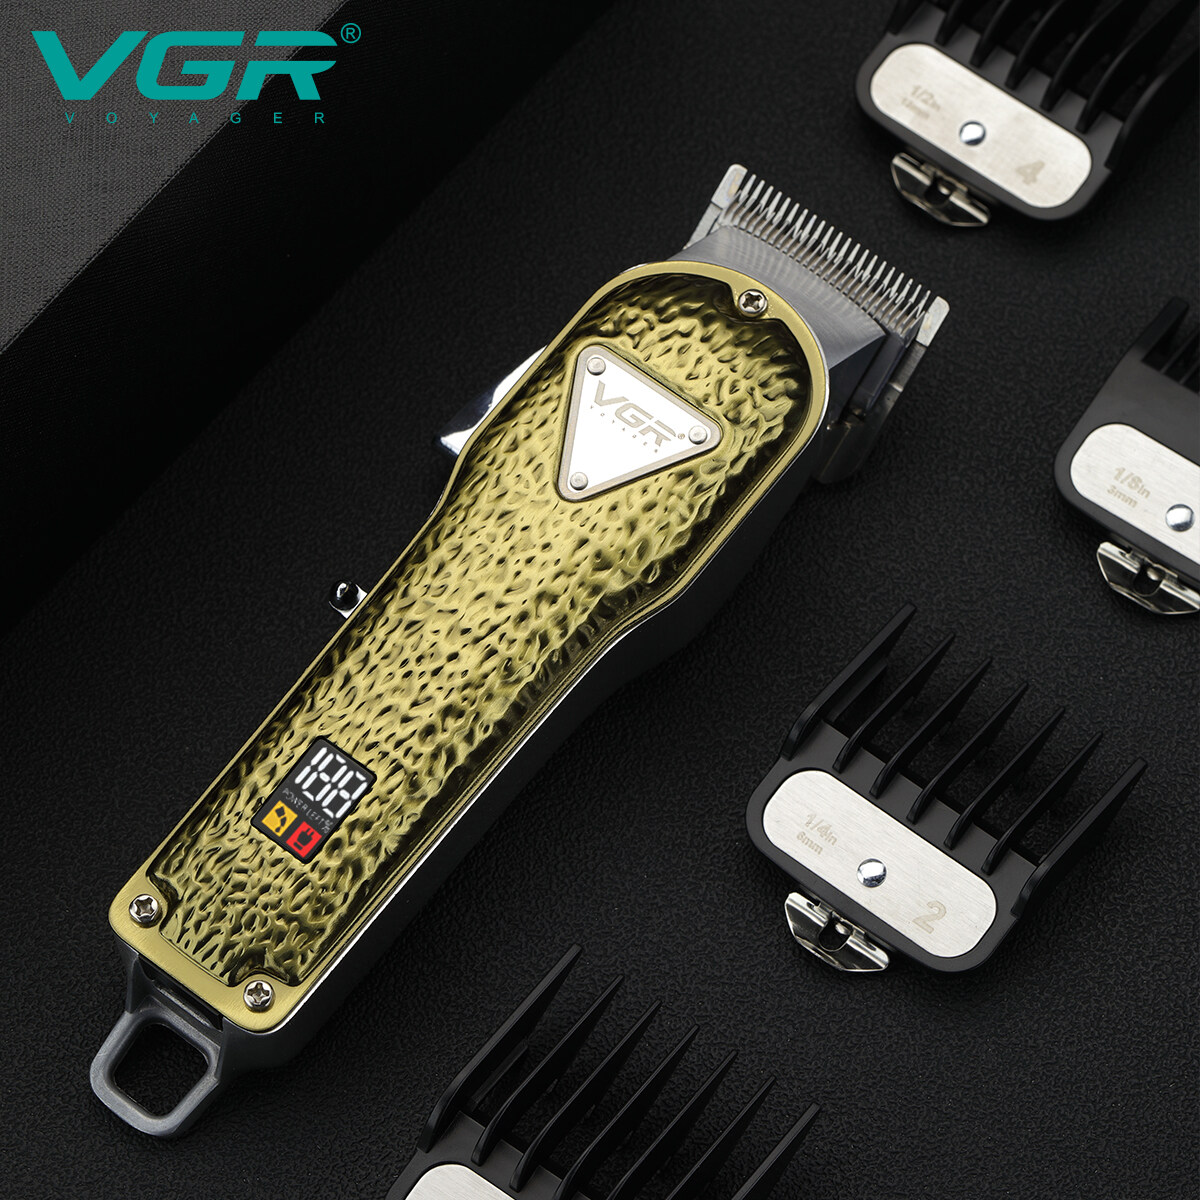 professional hair clipper companies, professional hair clipper set factory, professional hair clipper wholesaler, rechargeable hair trimmer factories, rechargeable hair trimmer manufacturers